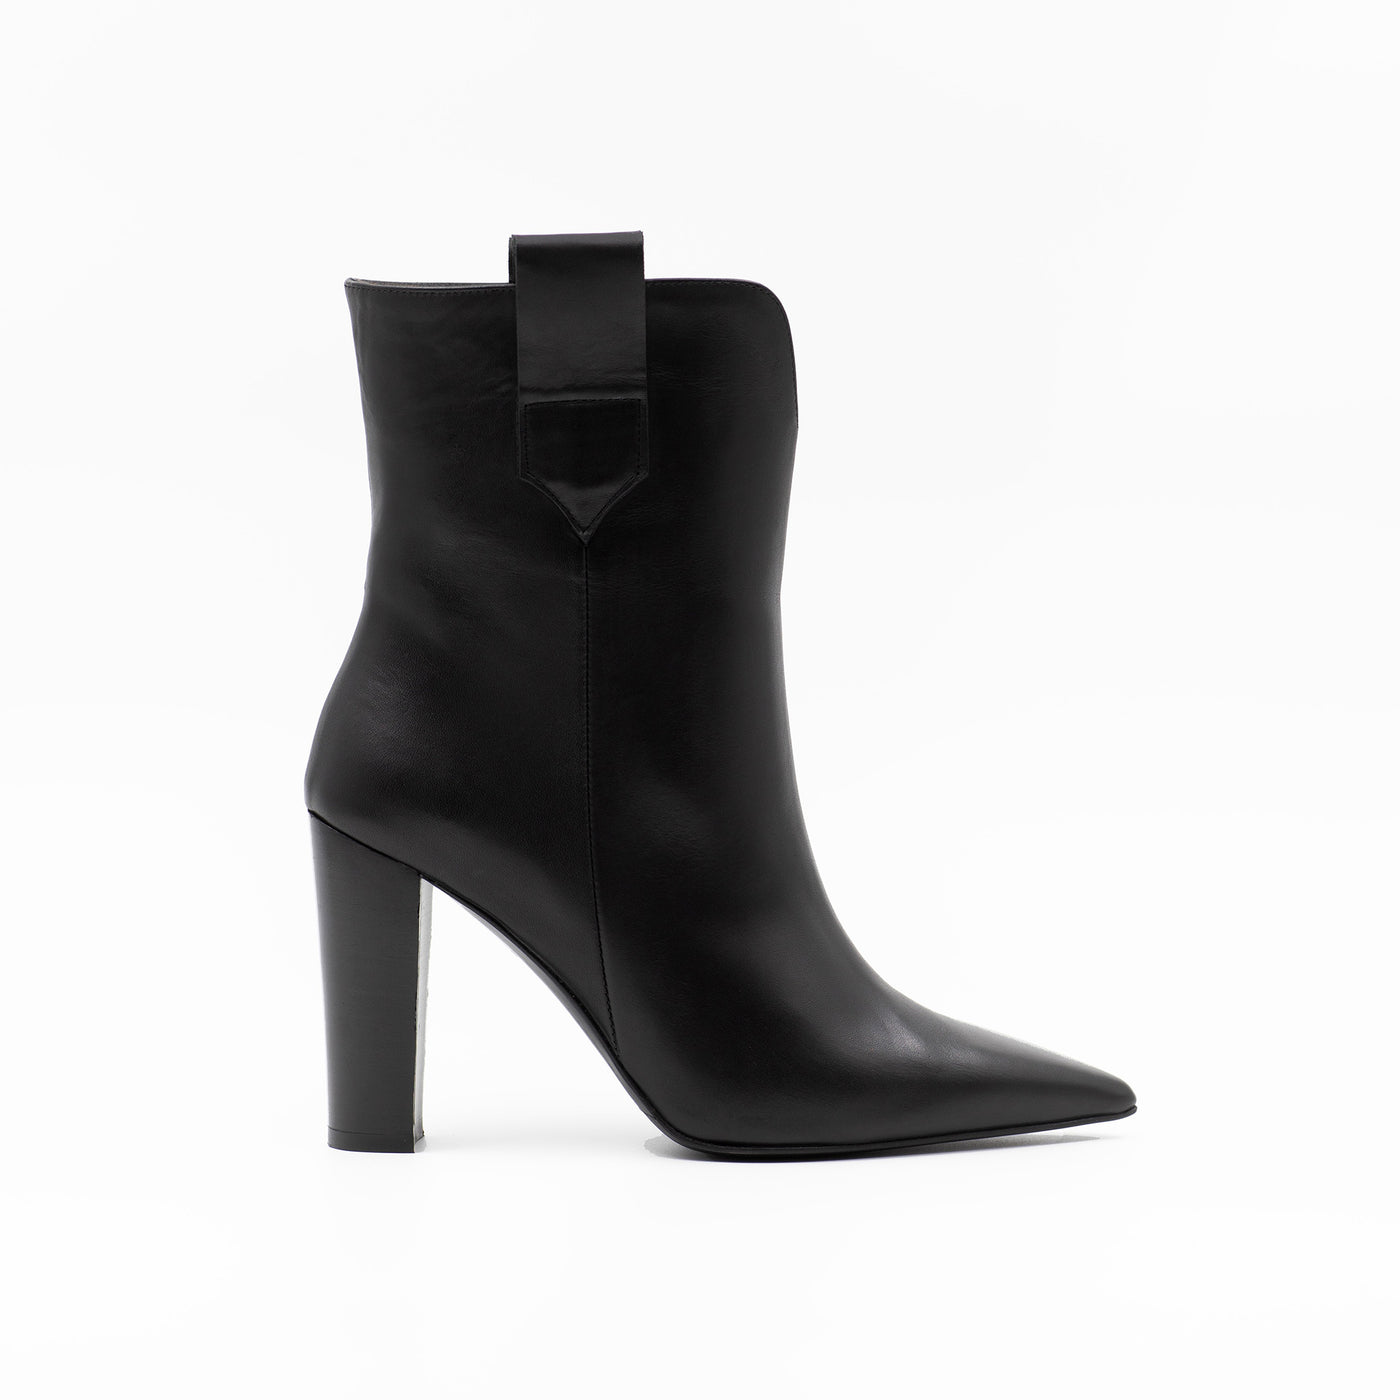 Point toe ankle boot in black leather with straight shaft and block heel